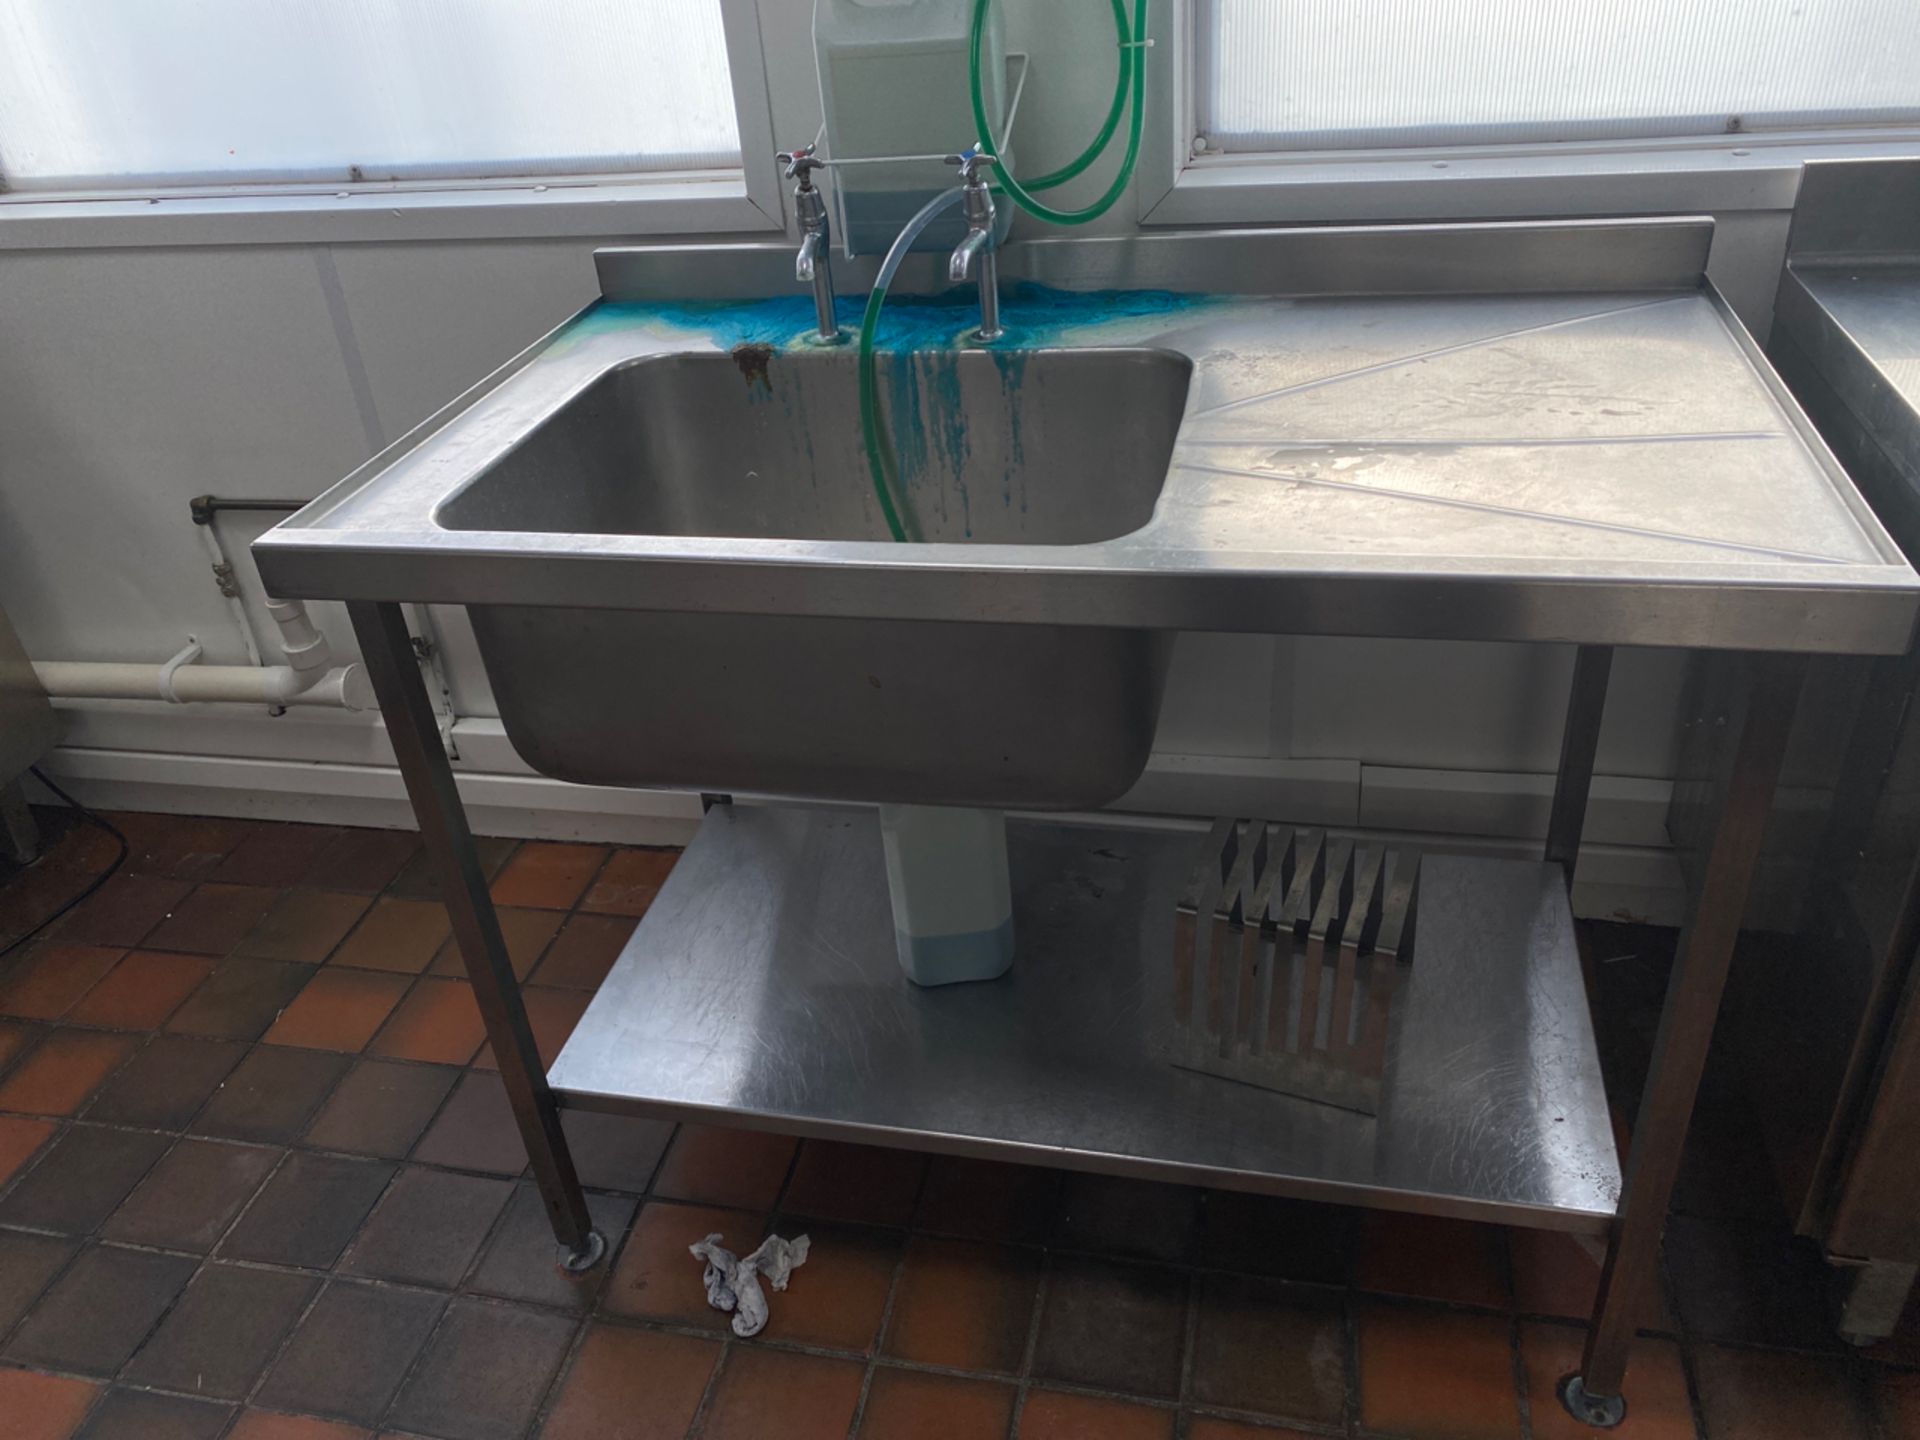 Stainless Steel Sink Unit - Image 2 of 7